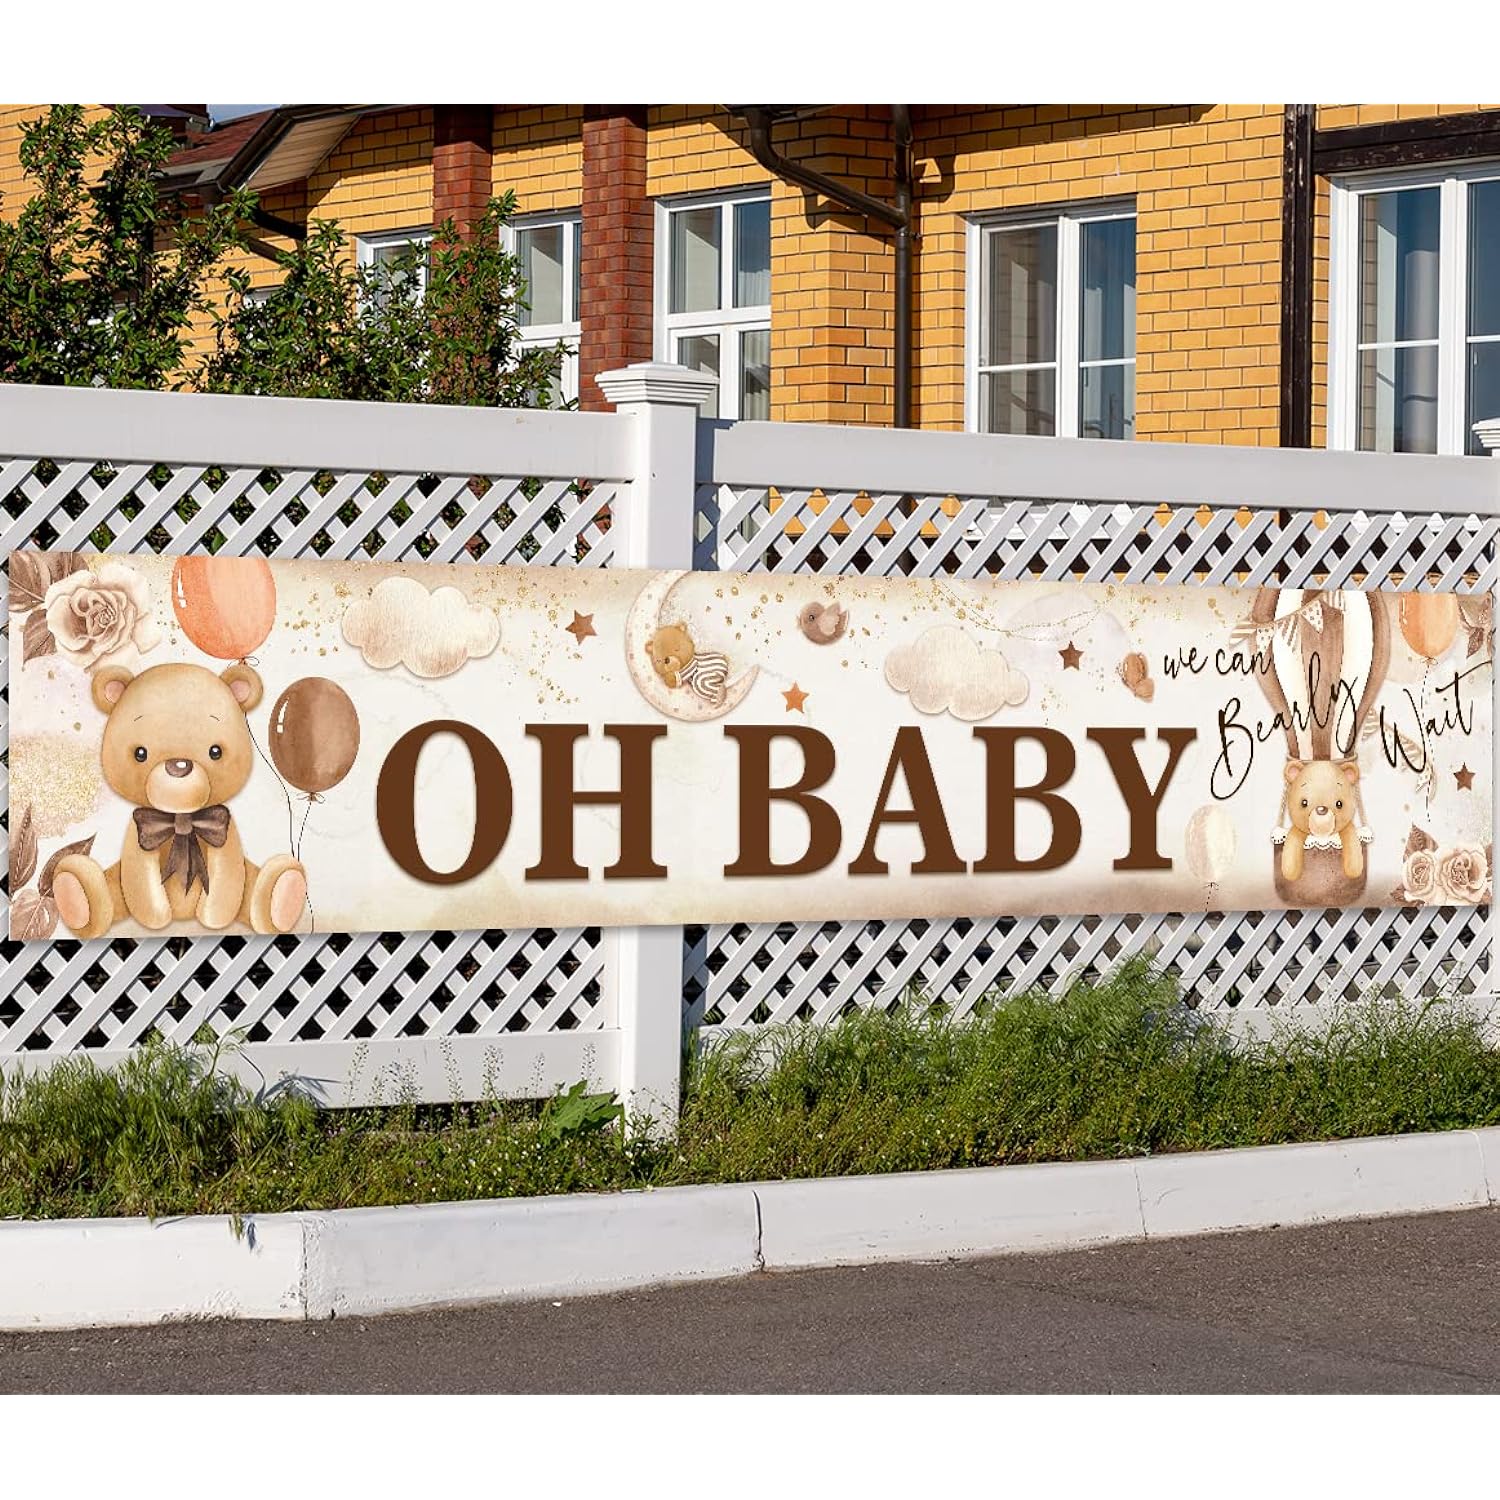 EBD Products Large Teddy Bear Baby Shower Banner We Can Bearly Wait Decorations Backdrop Brown Bear Oh Baby Sign  SEA8187258